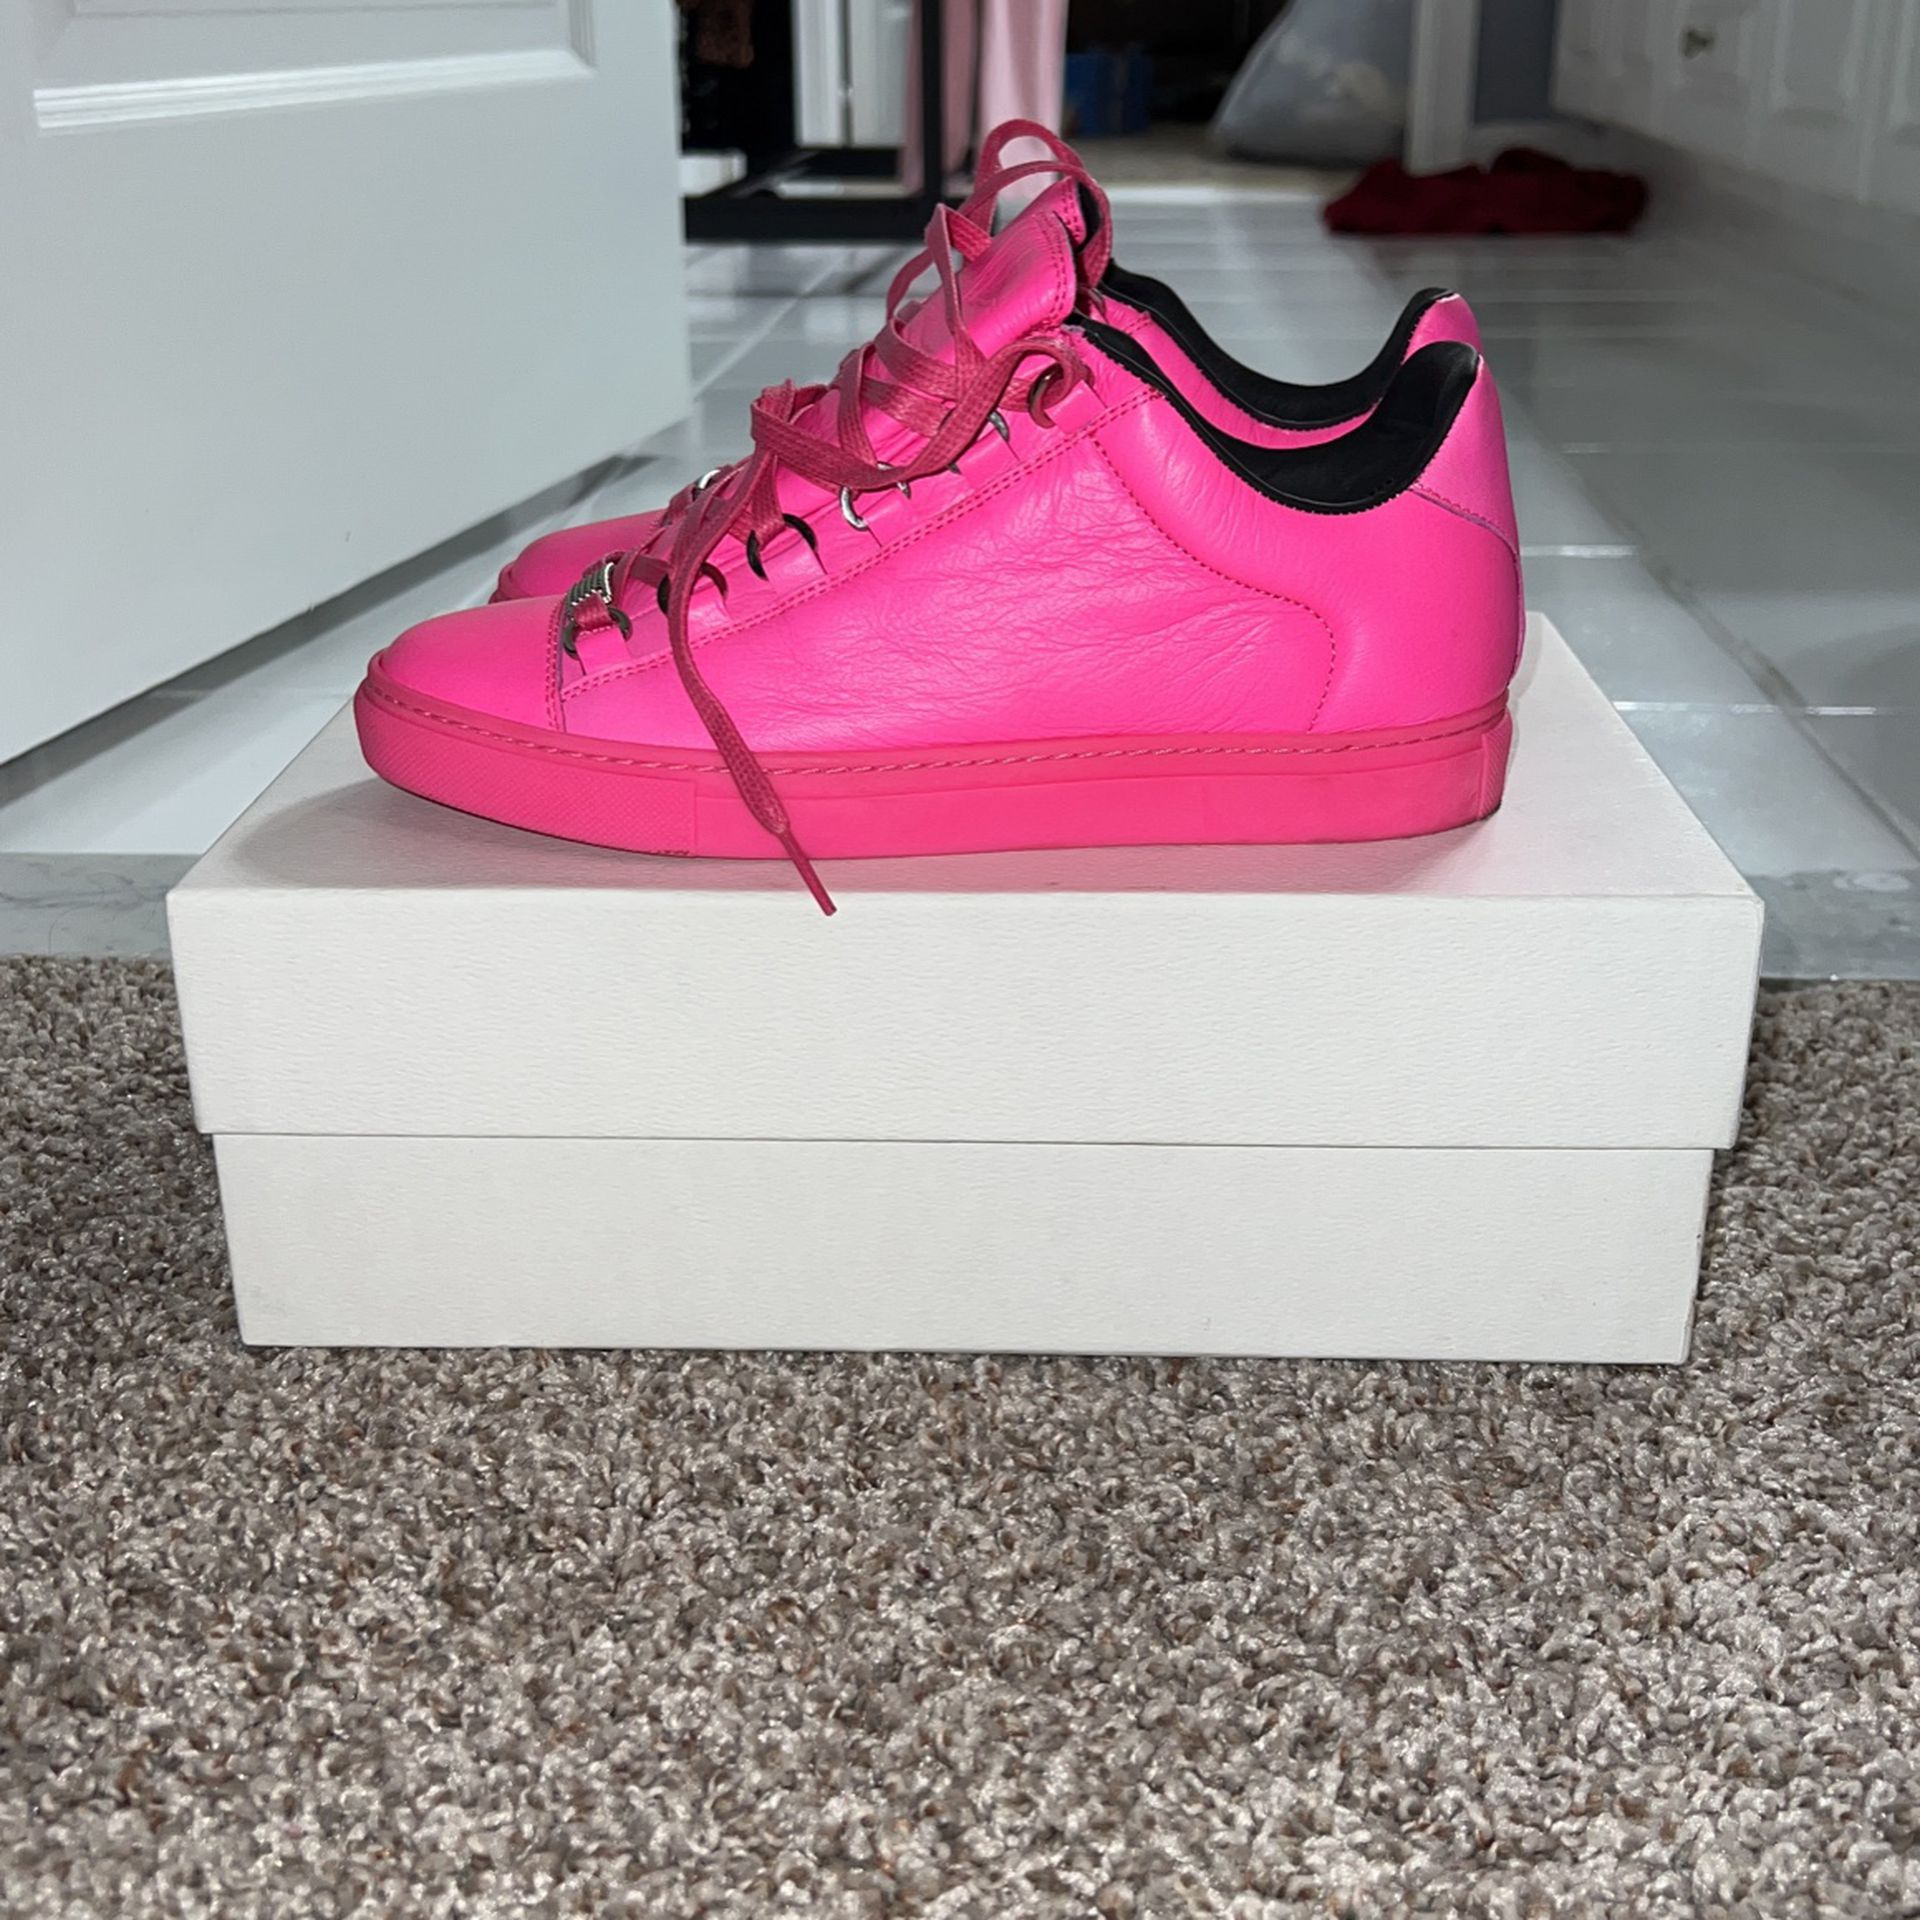 delikat Moderat død Womens Balenciaga Arena Sneakers Size 6 for Sale in Md City, MD - OfferUp